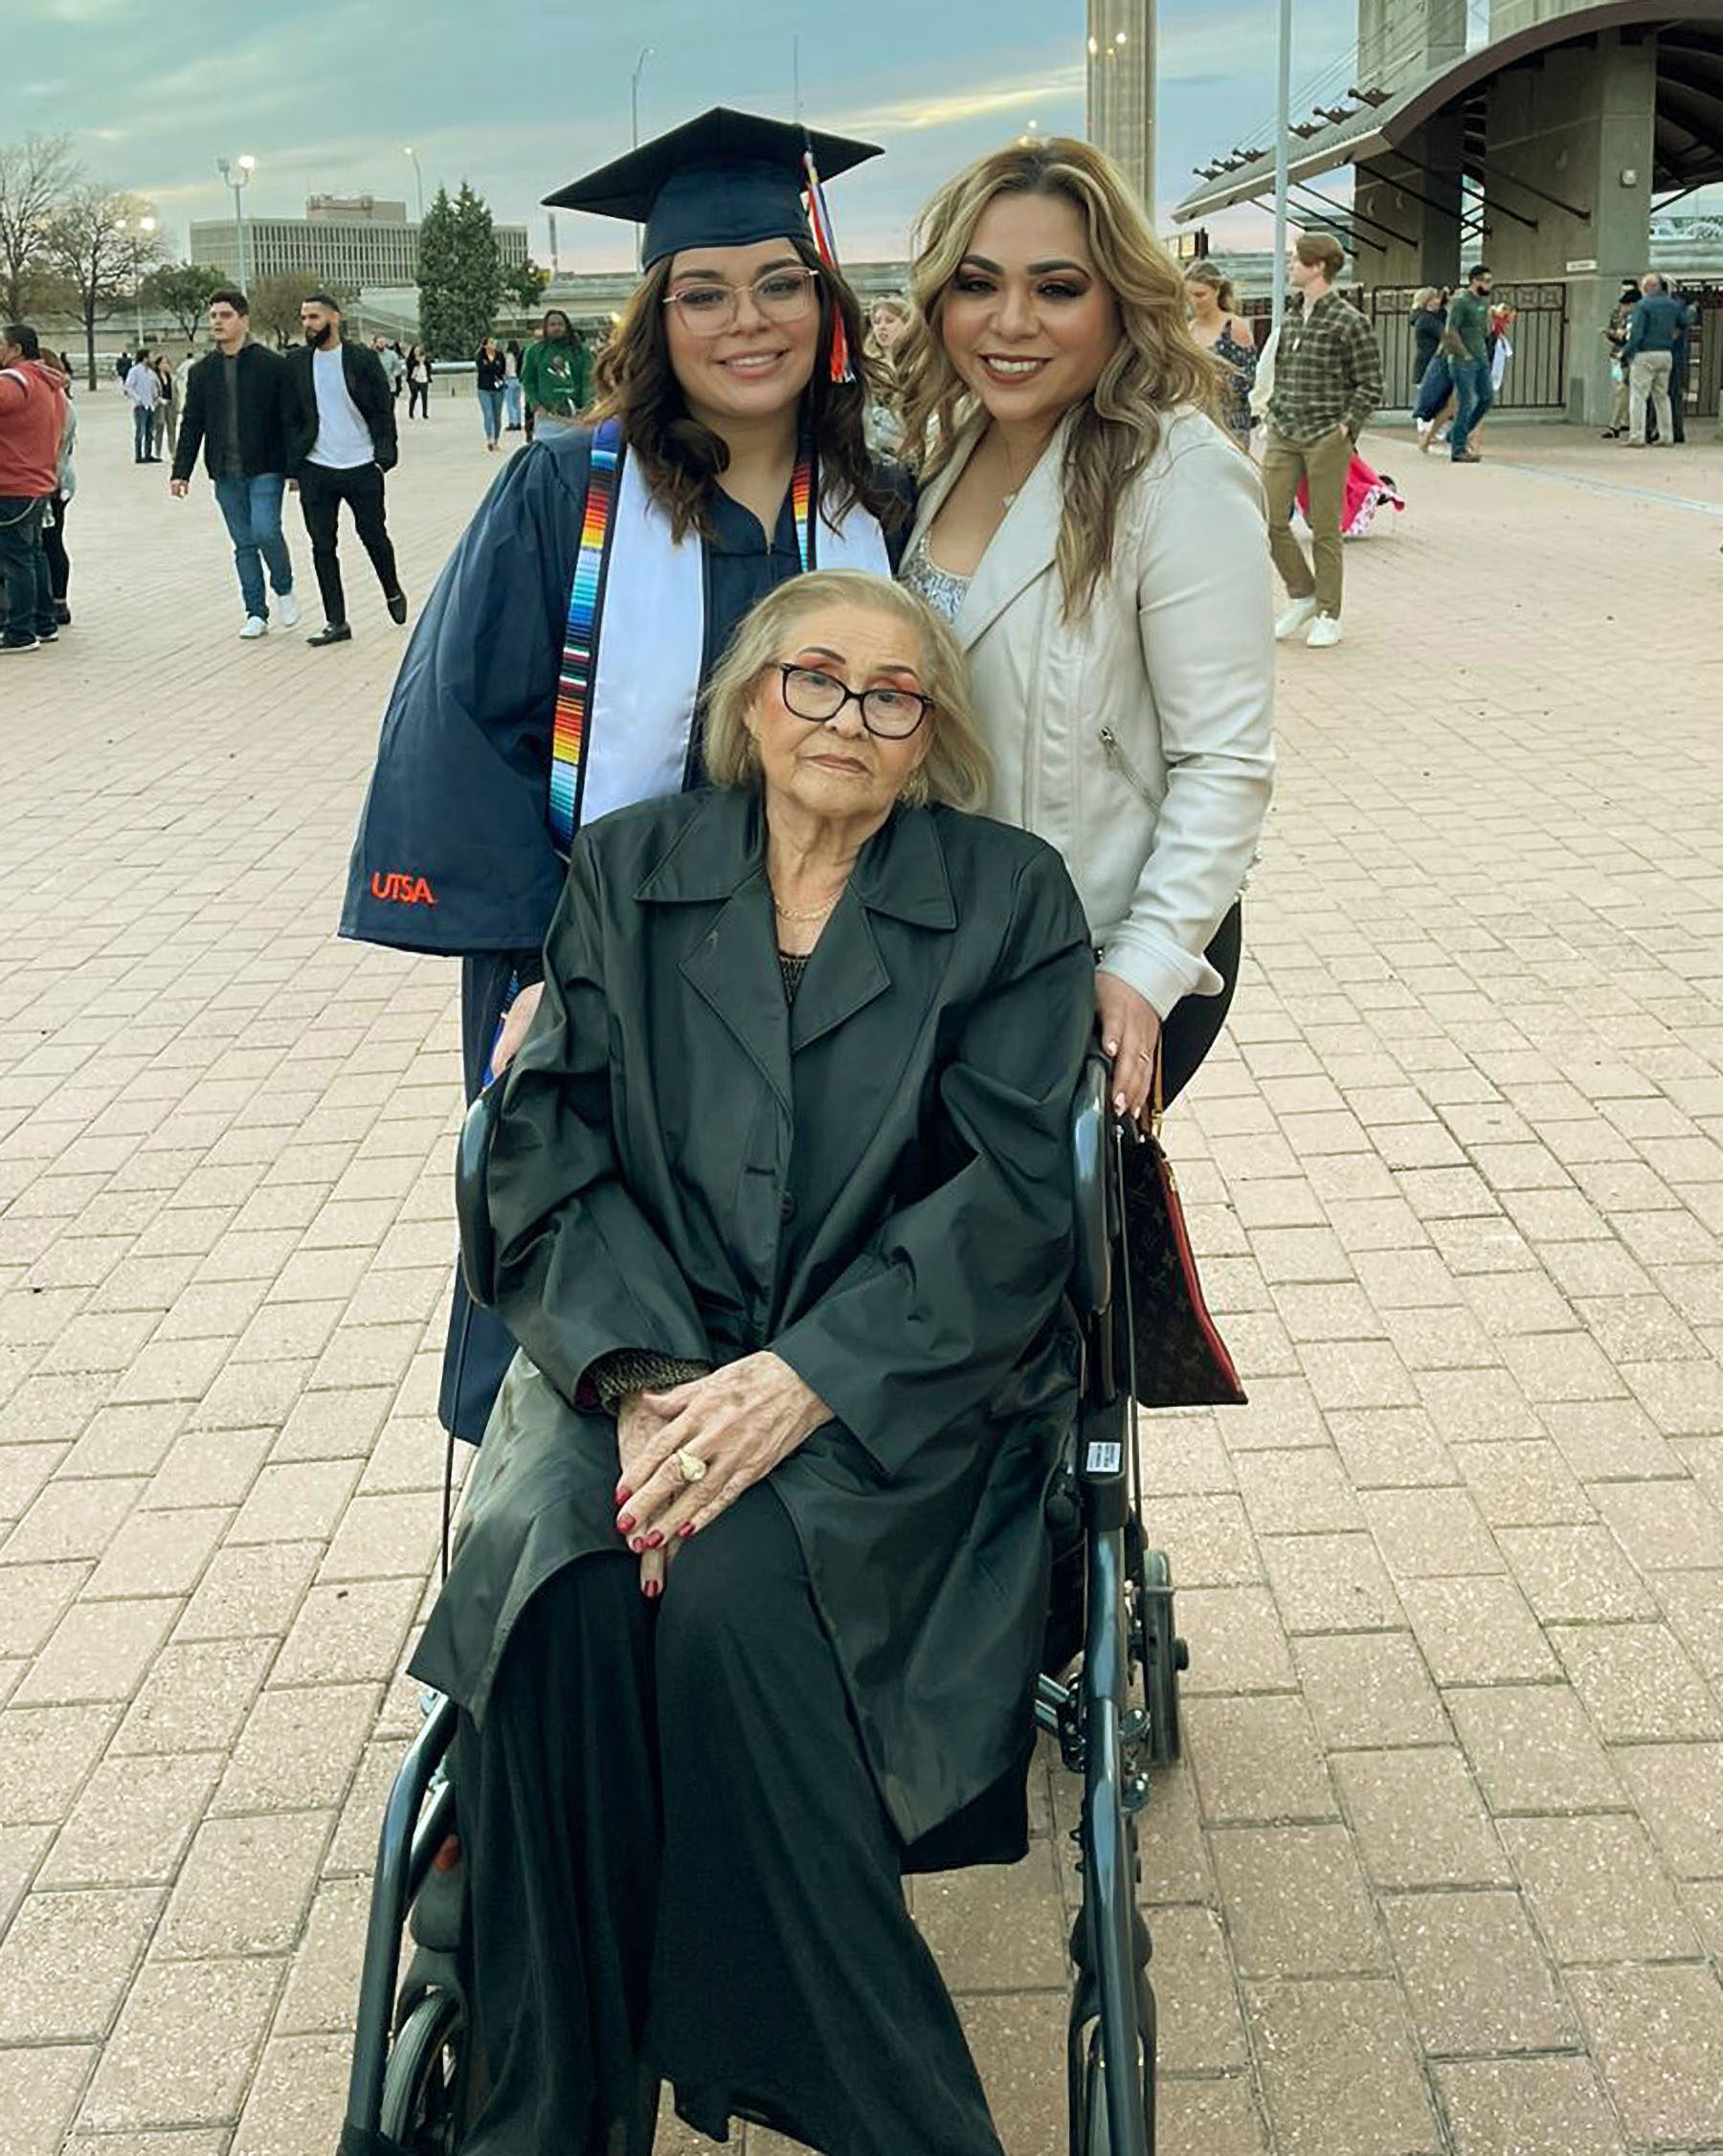 Jacqueline recreates her mom's graduation photo at her own graduation, with her mom and grandmother.